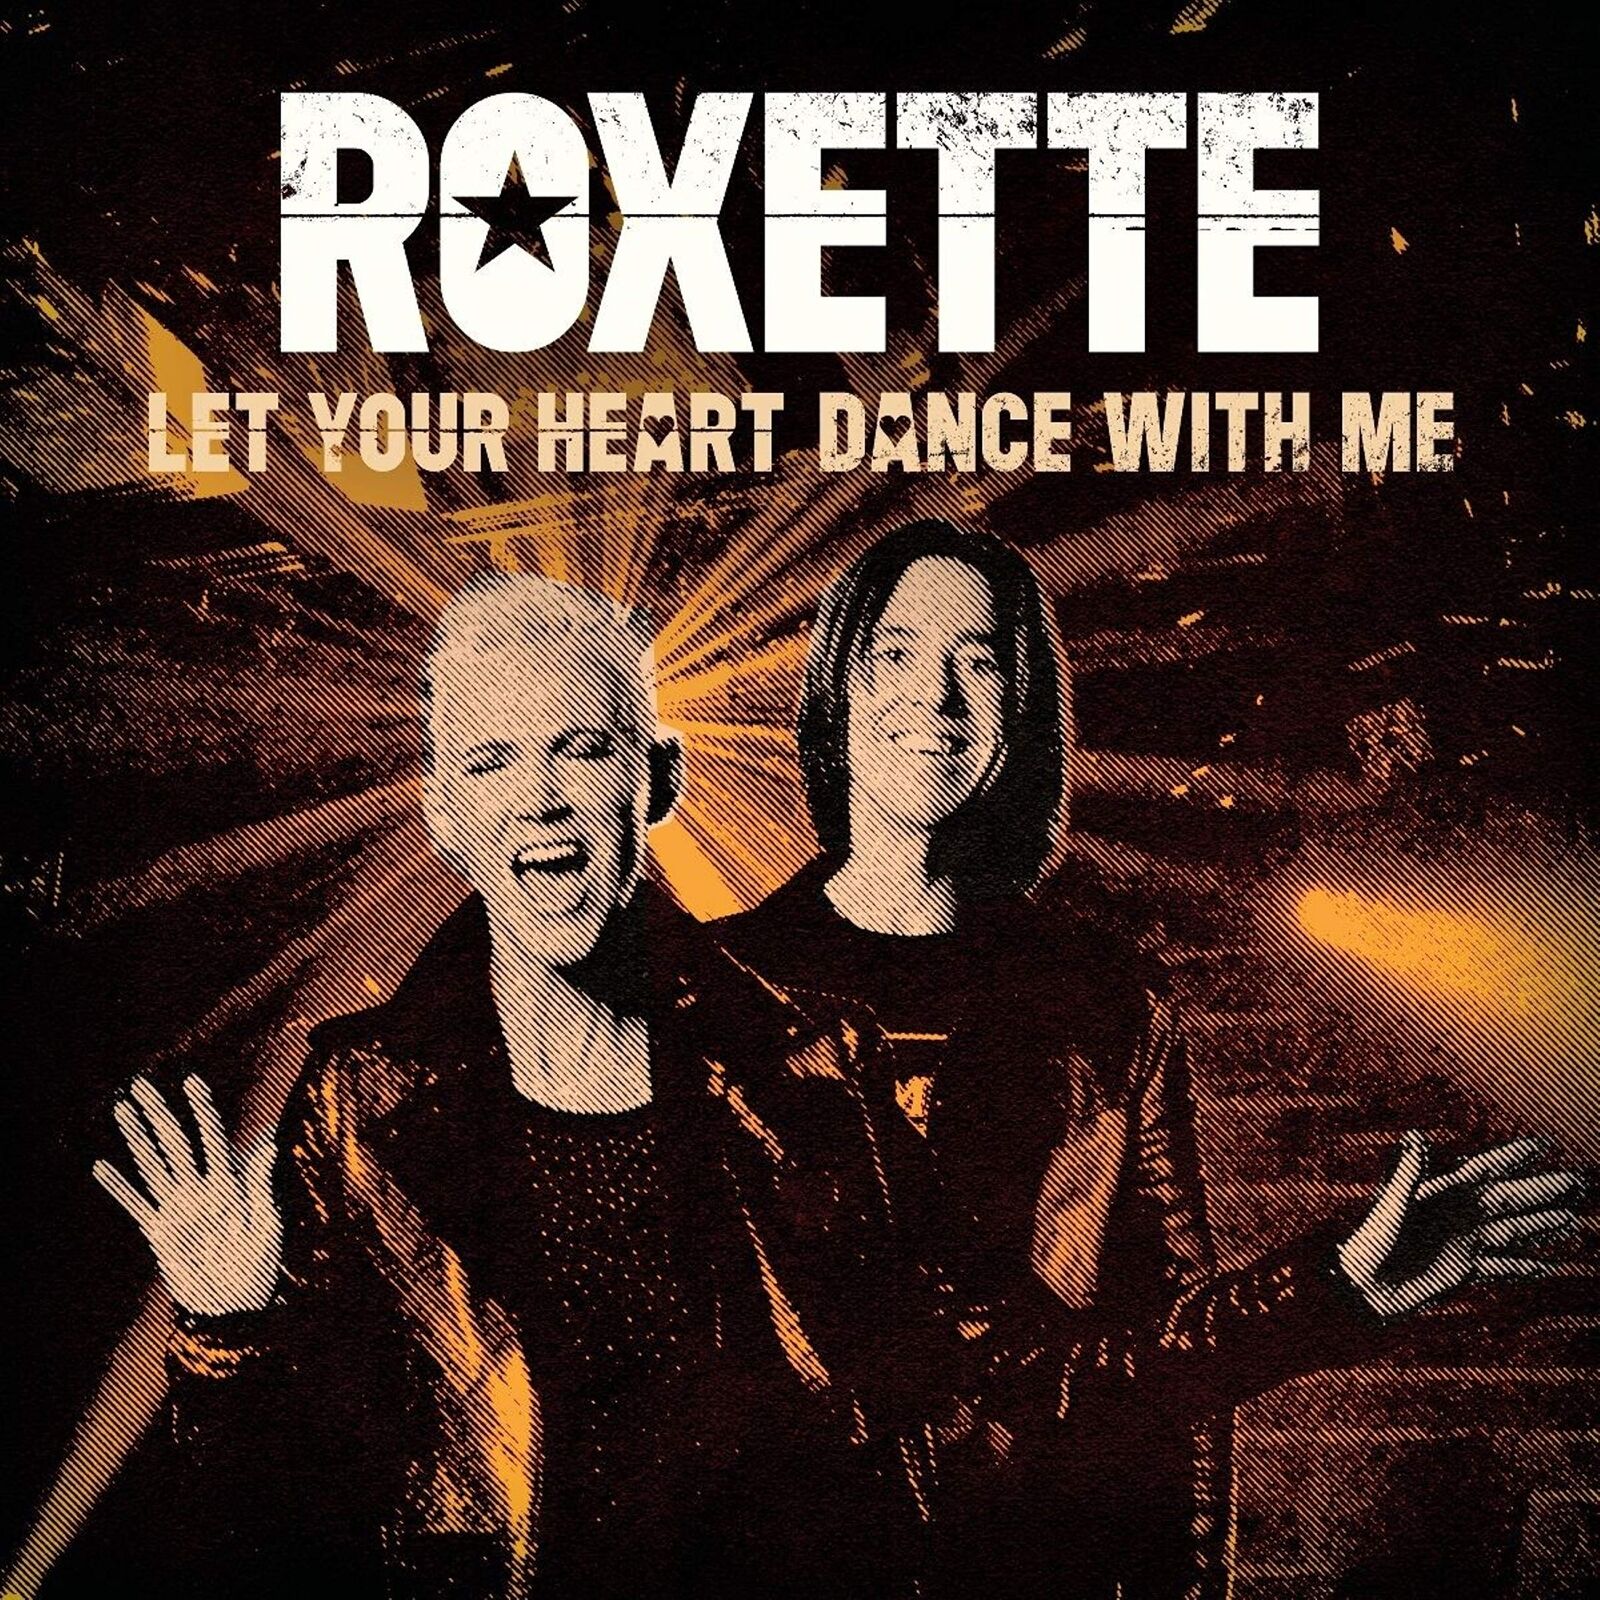 ROXETTE Let Your Heart Dance With Me (Vinyl) (UK IMPORT)